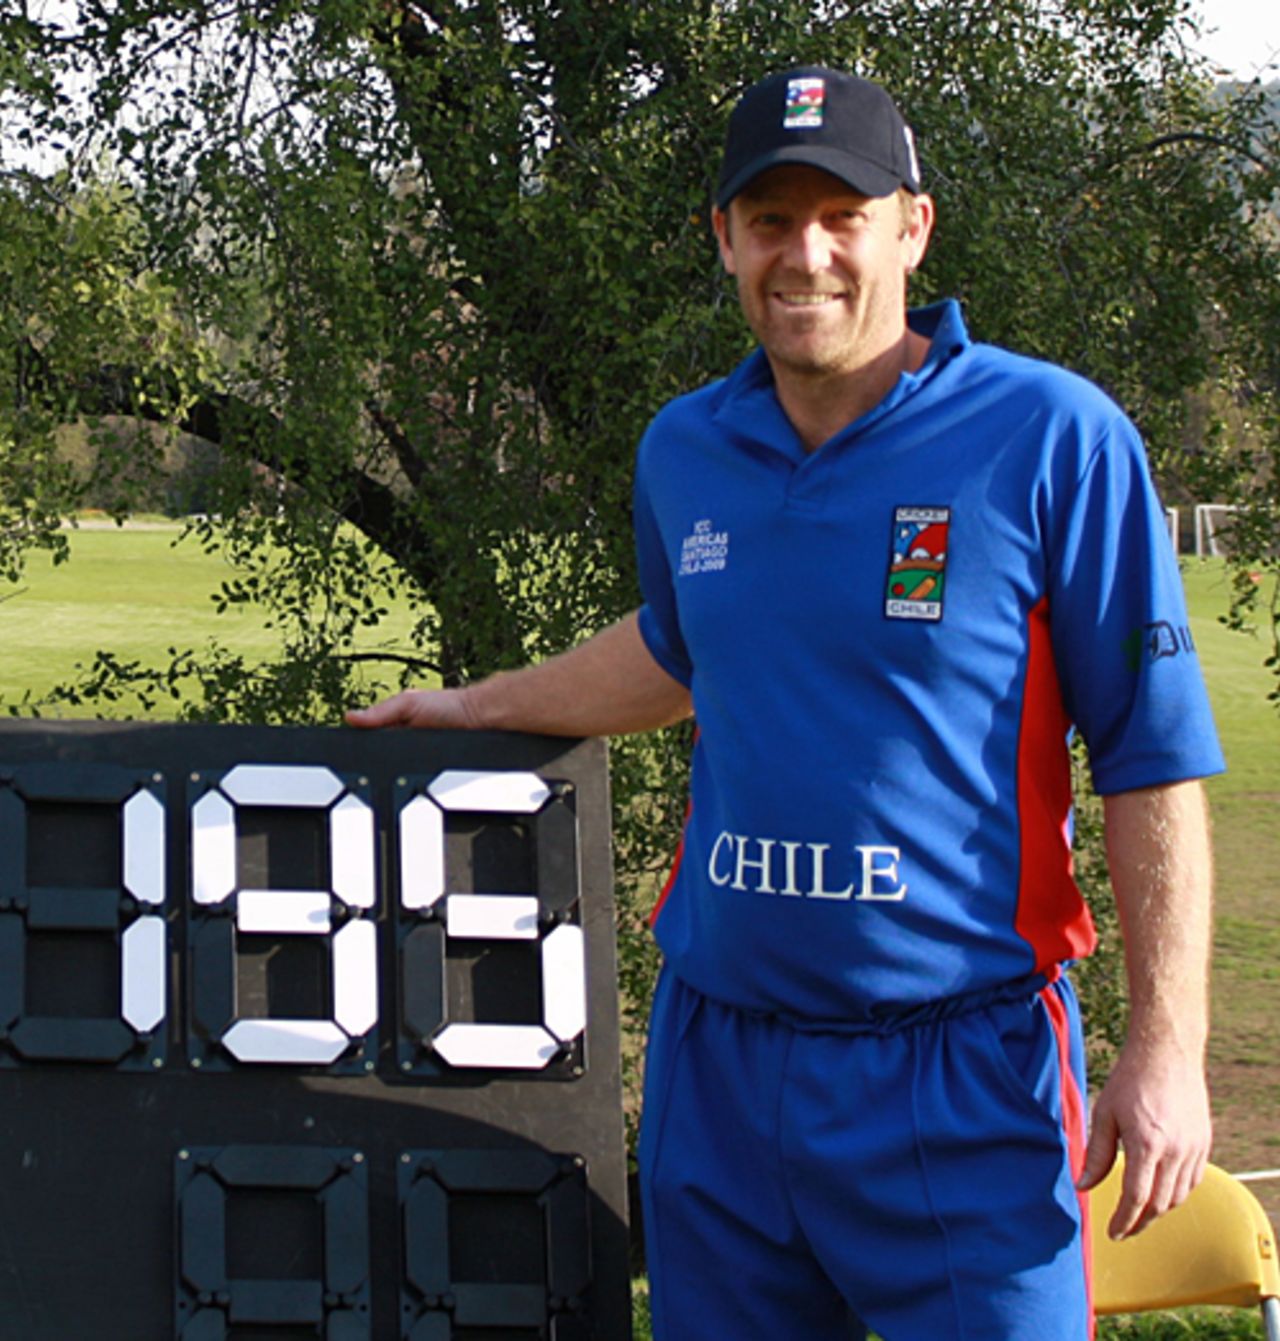 Simon Shalders after making 195 not out against Peru, ICC Americas Division 3, Santiago, October 10, 2009